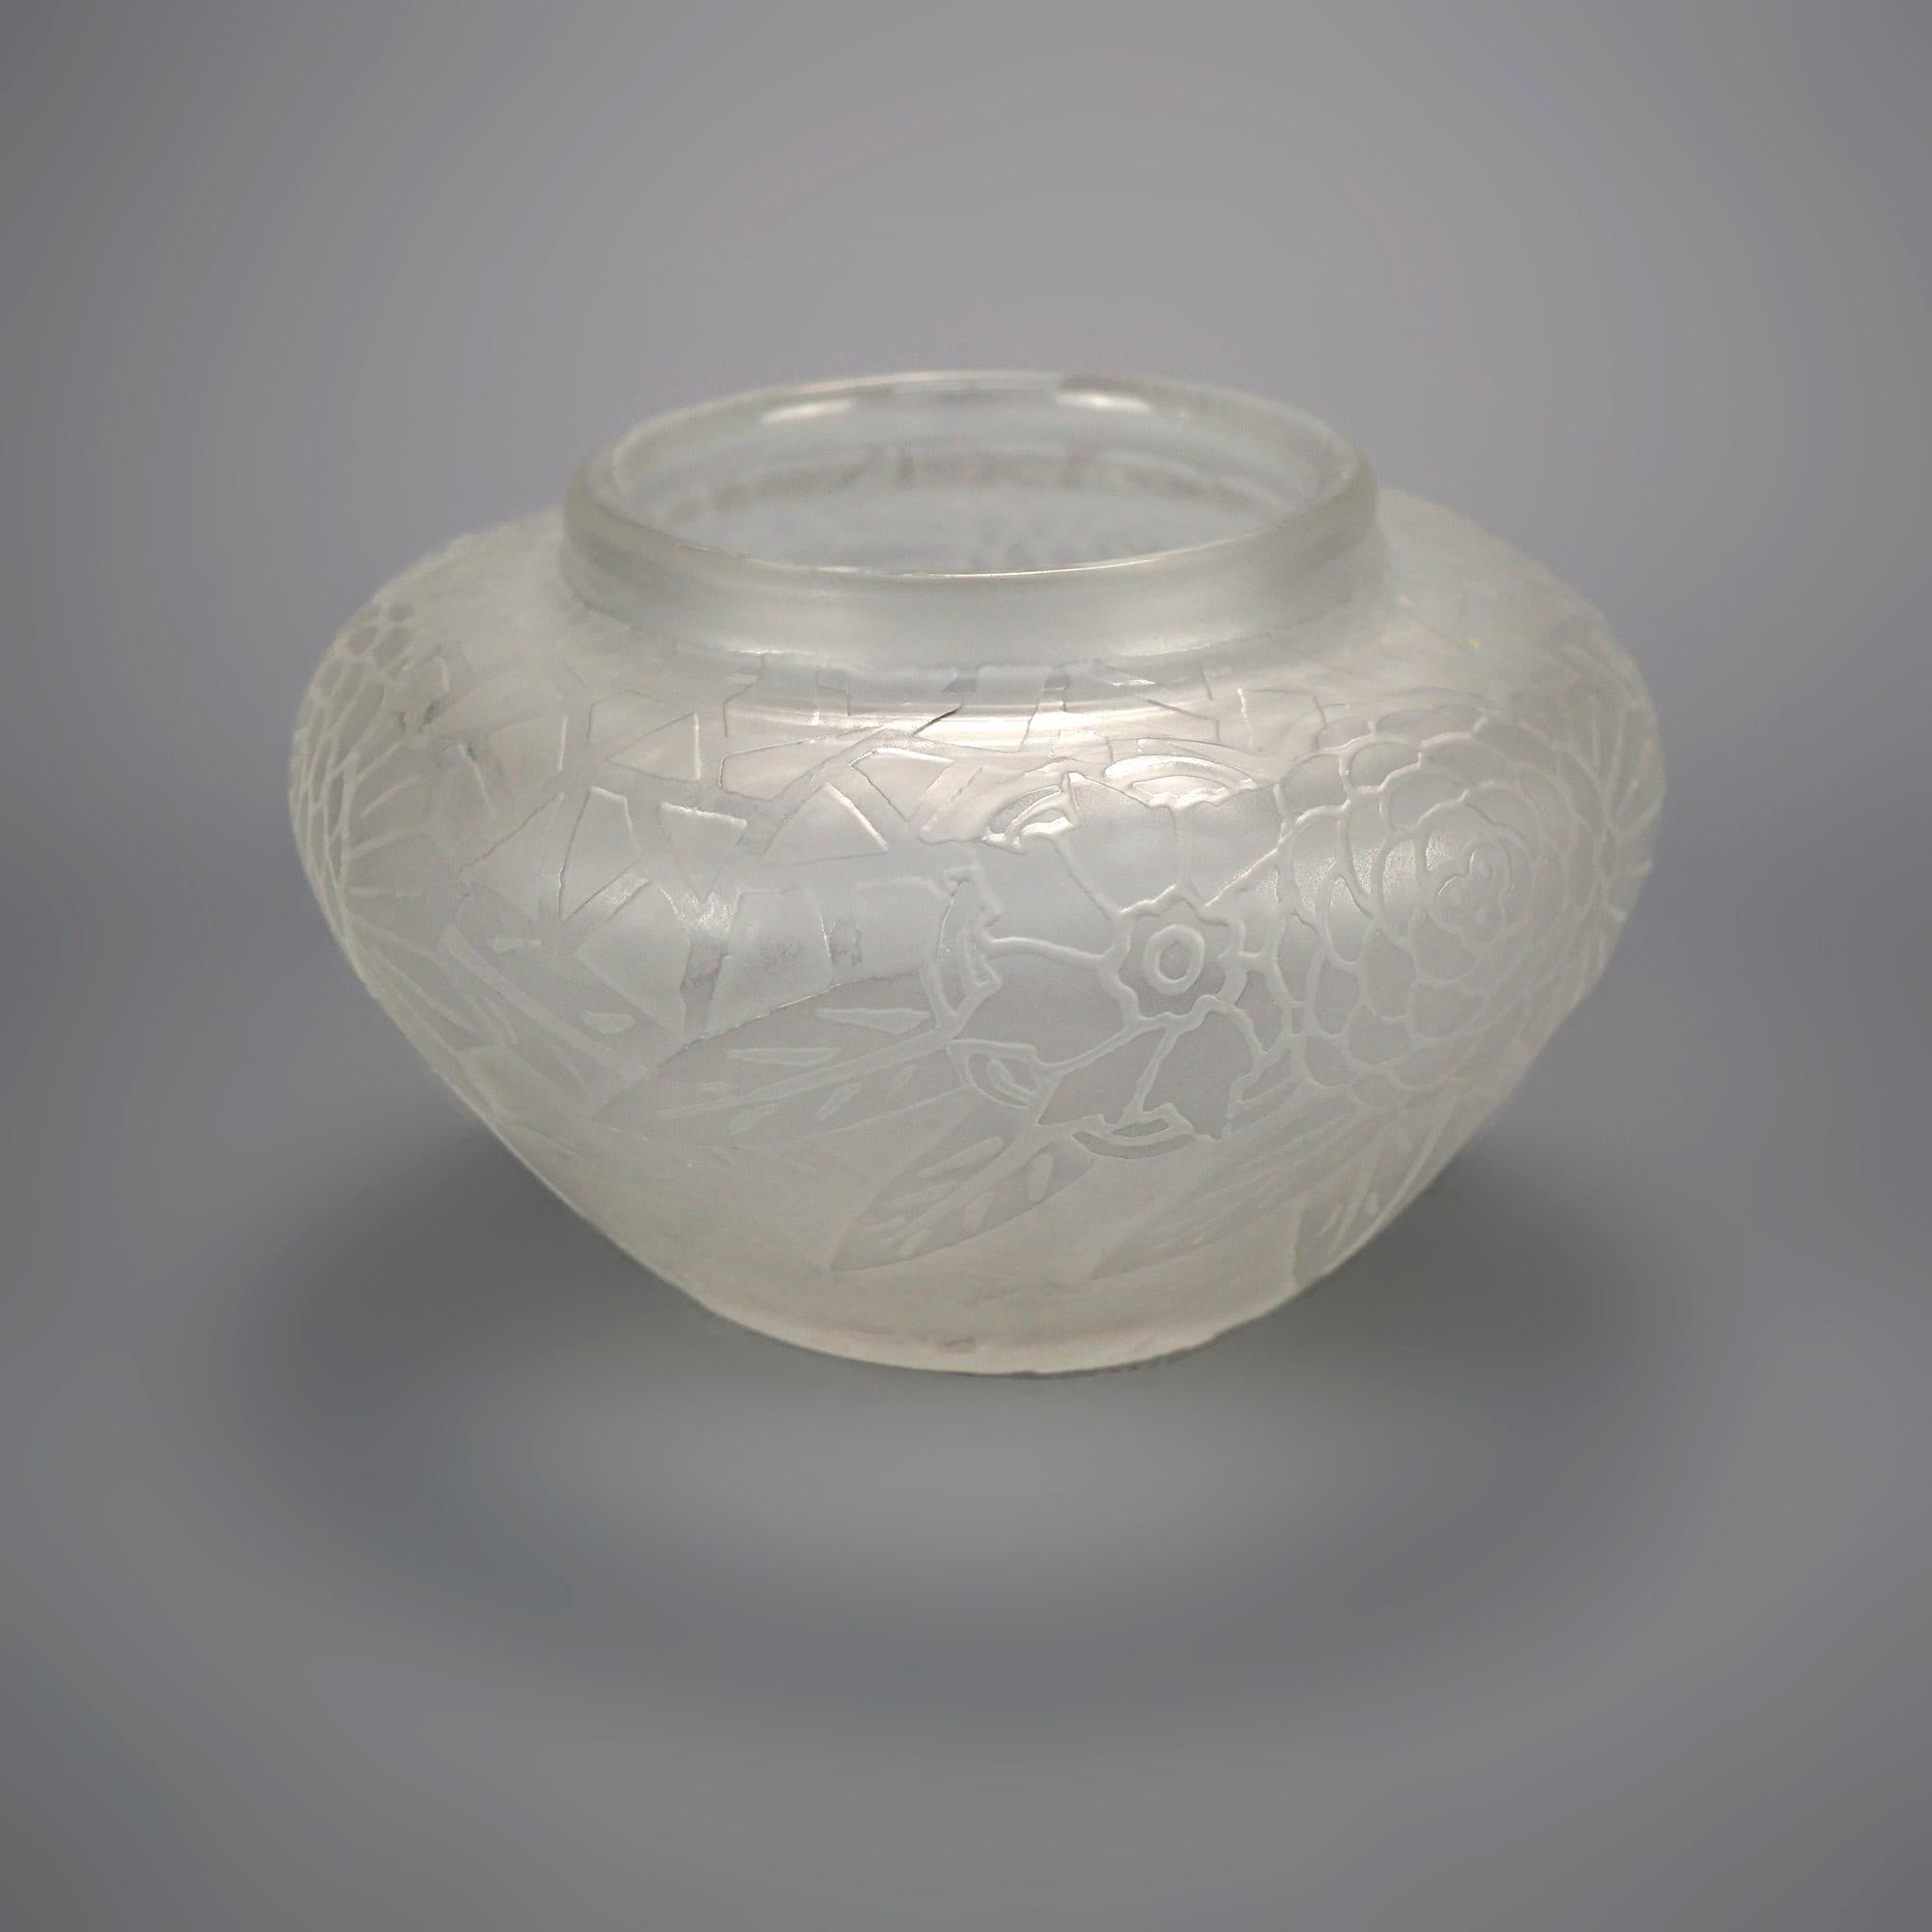 An antique Art Deco squat vase by Steuben offers art glass construction with acid cutback stylized floral design, maker signed as photographed, circa 1920

Measures- 4.75'' H x 7.75'' W x 7.75'' D.